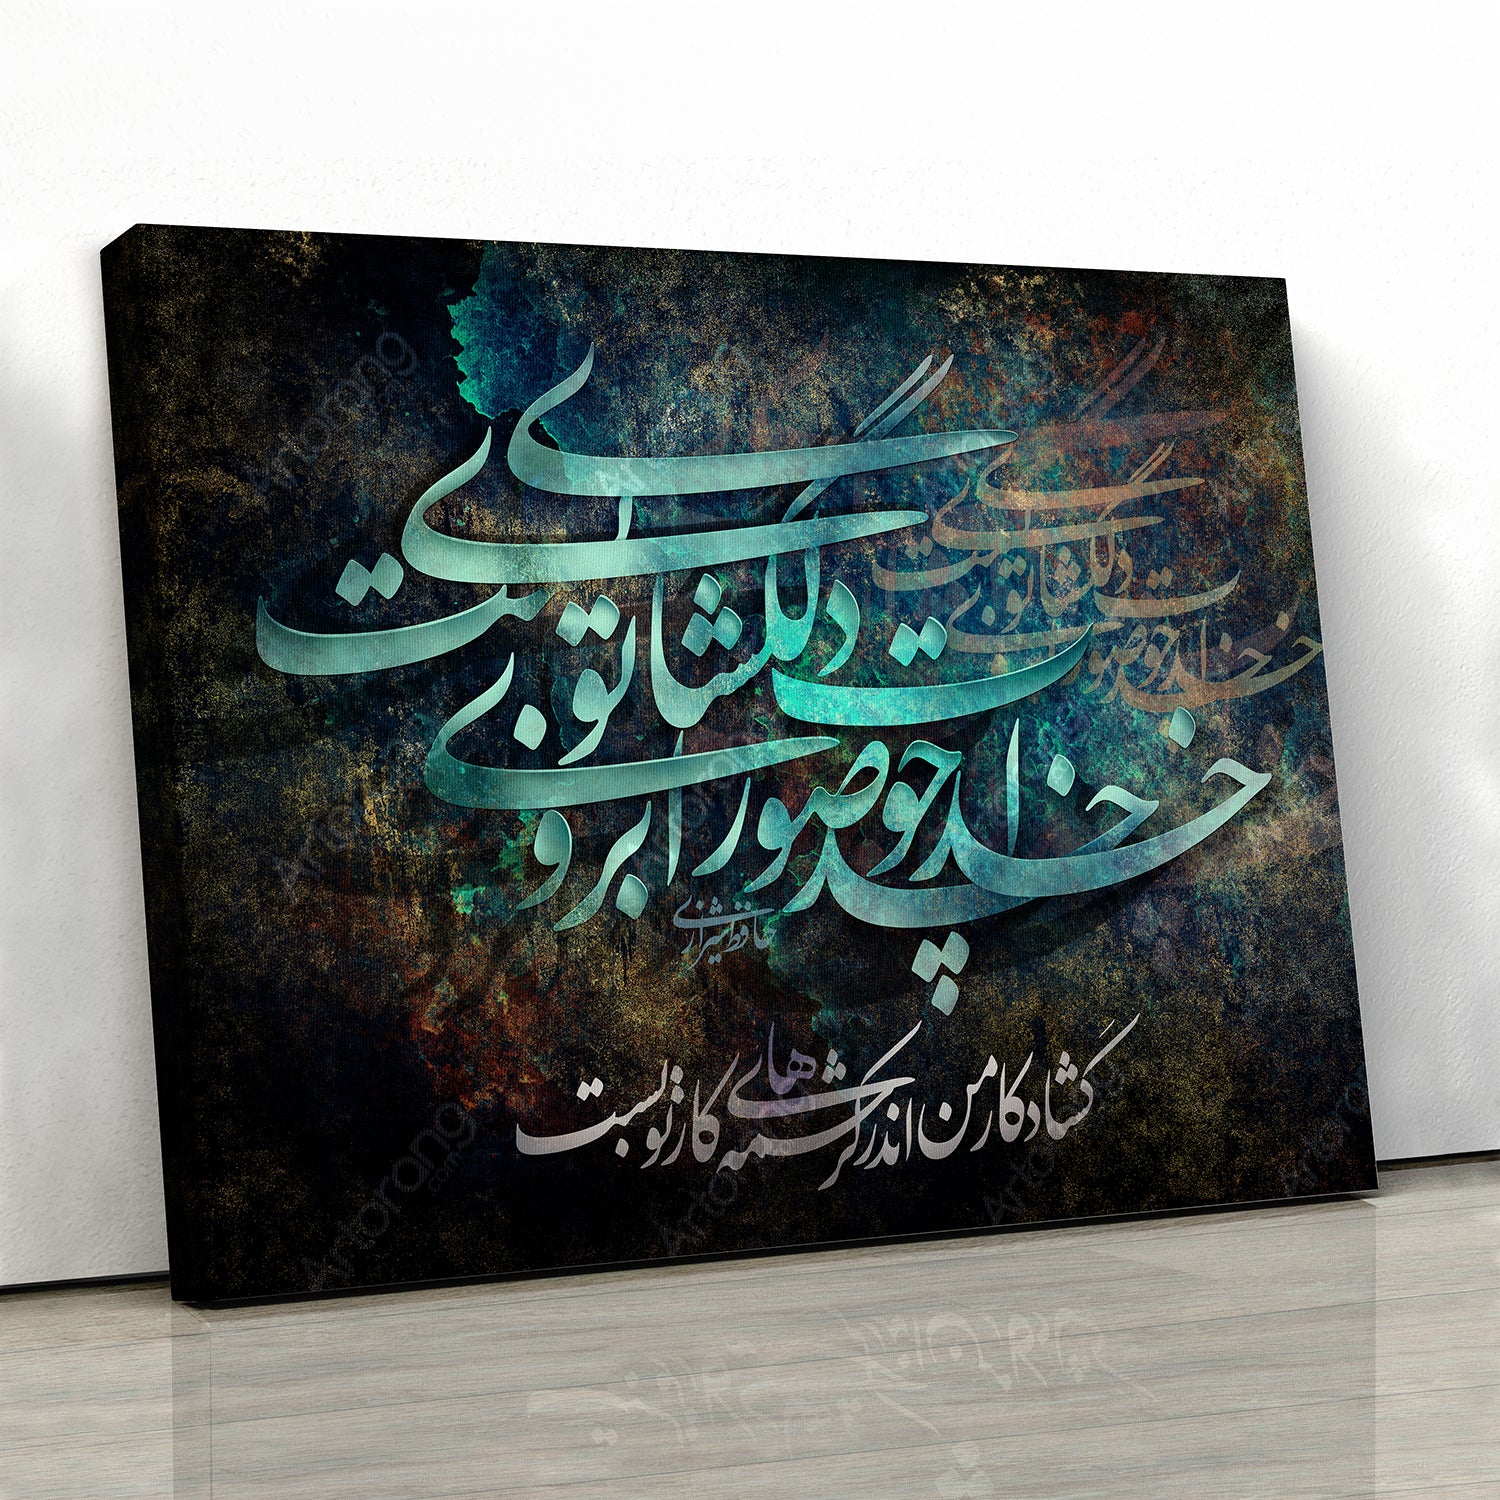 Trapped with your gestures, Hafez quote with Persian calligraphy wall art, Iranian gift - Artorang